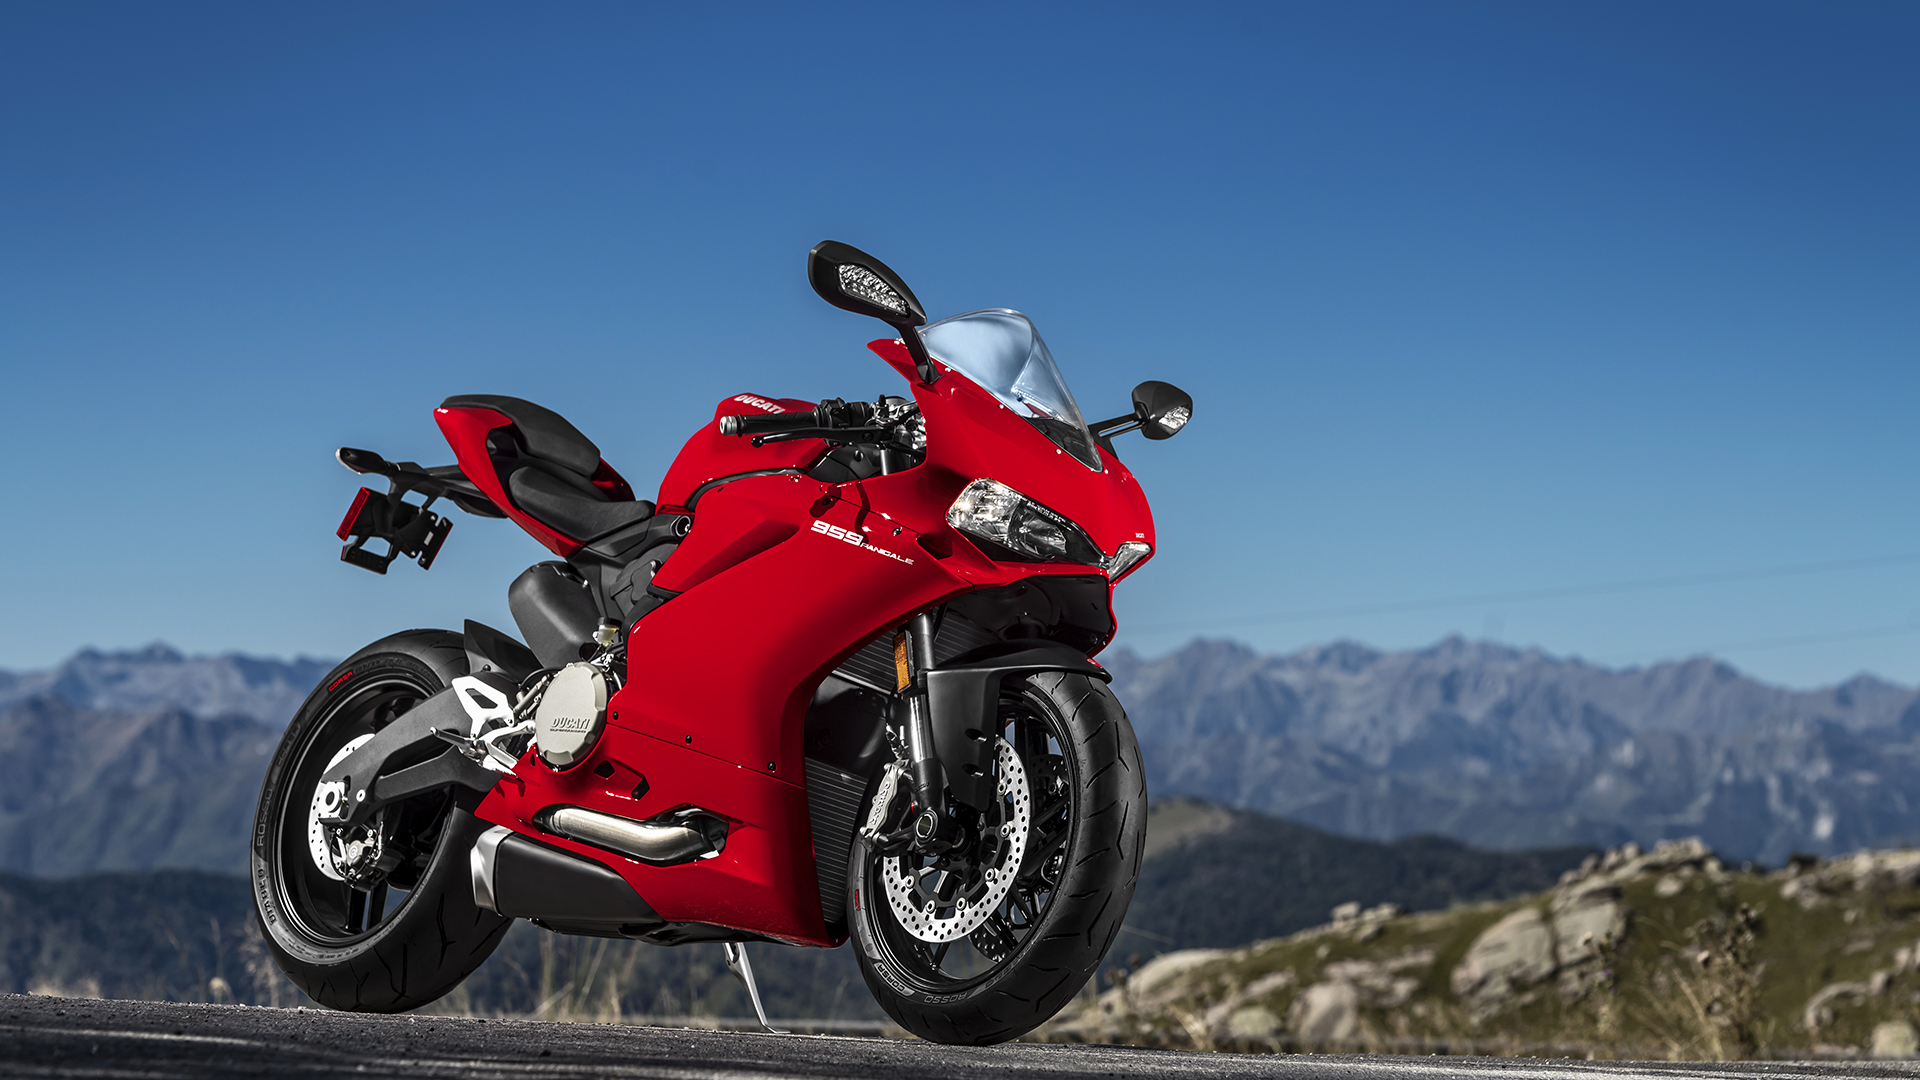 Ducati 959 Panigale Red - 1920x1080 Wallpaper 